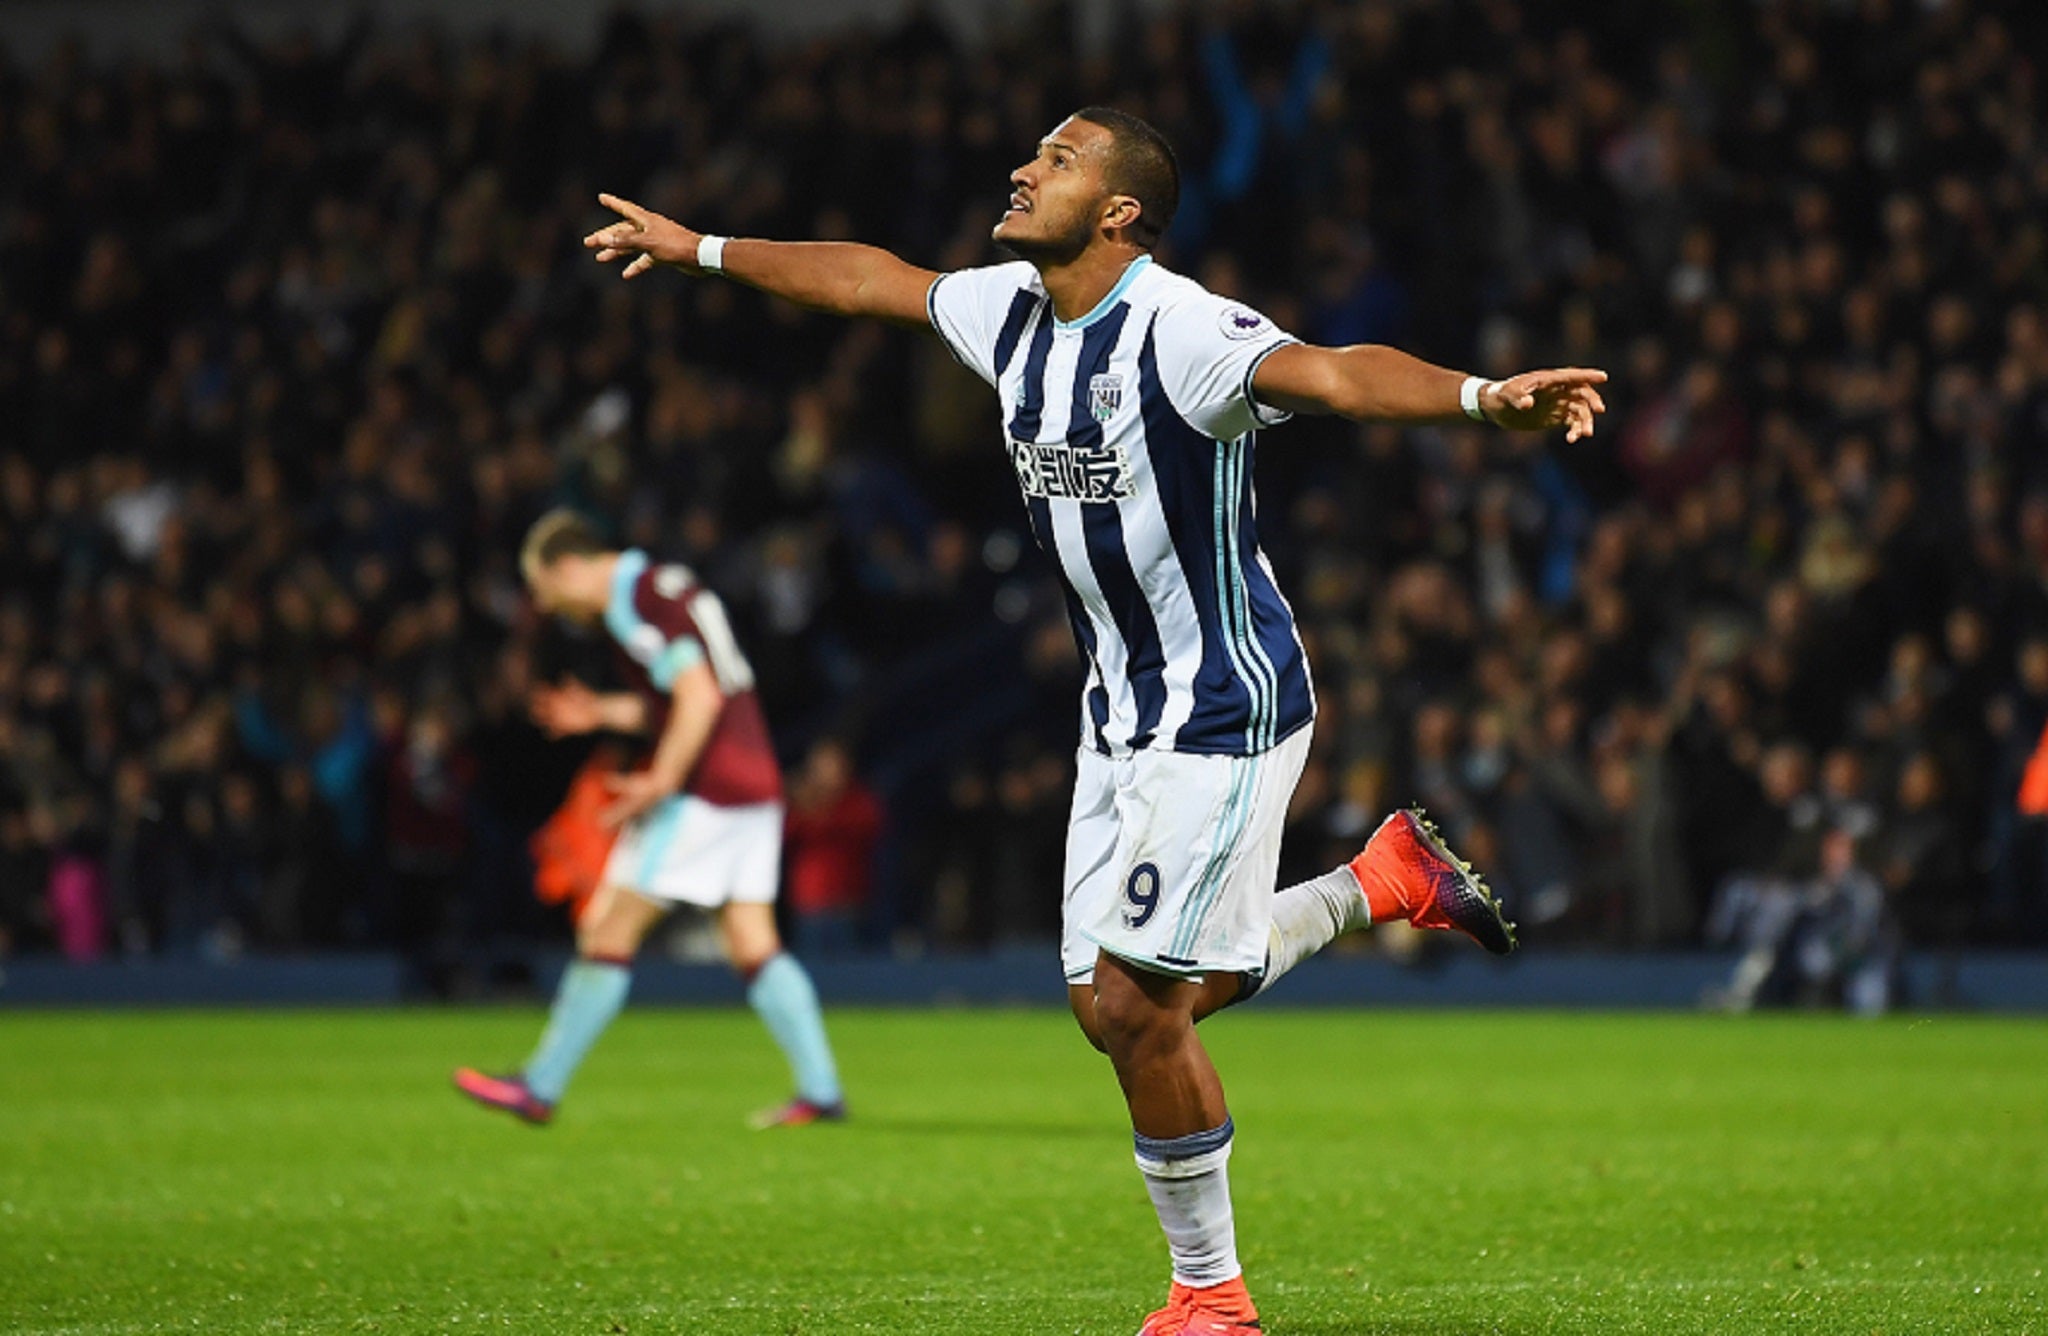 Salomon Rondon celebrates after scoring the fourth goal in West Brom's victory over Burnley